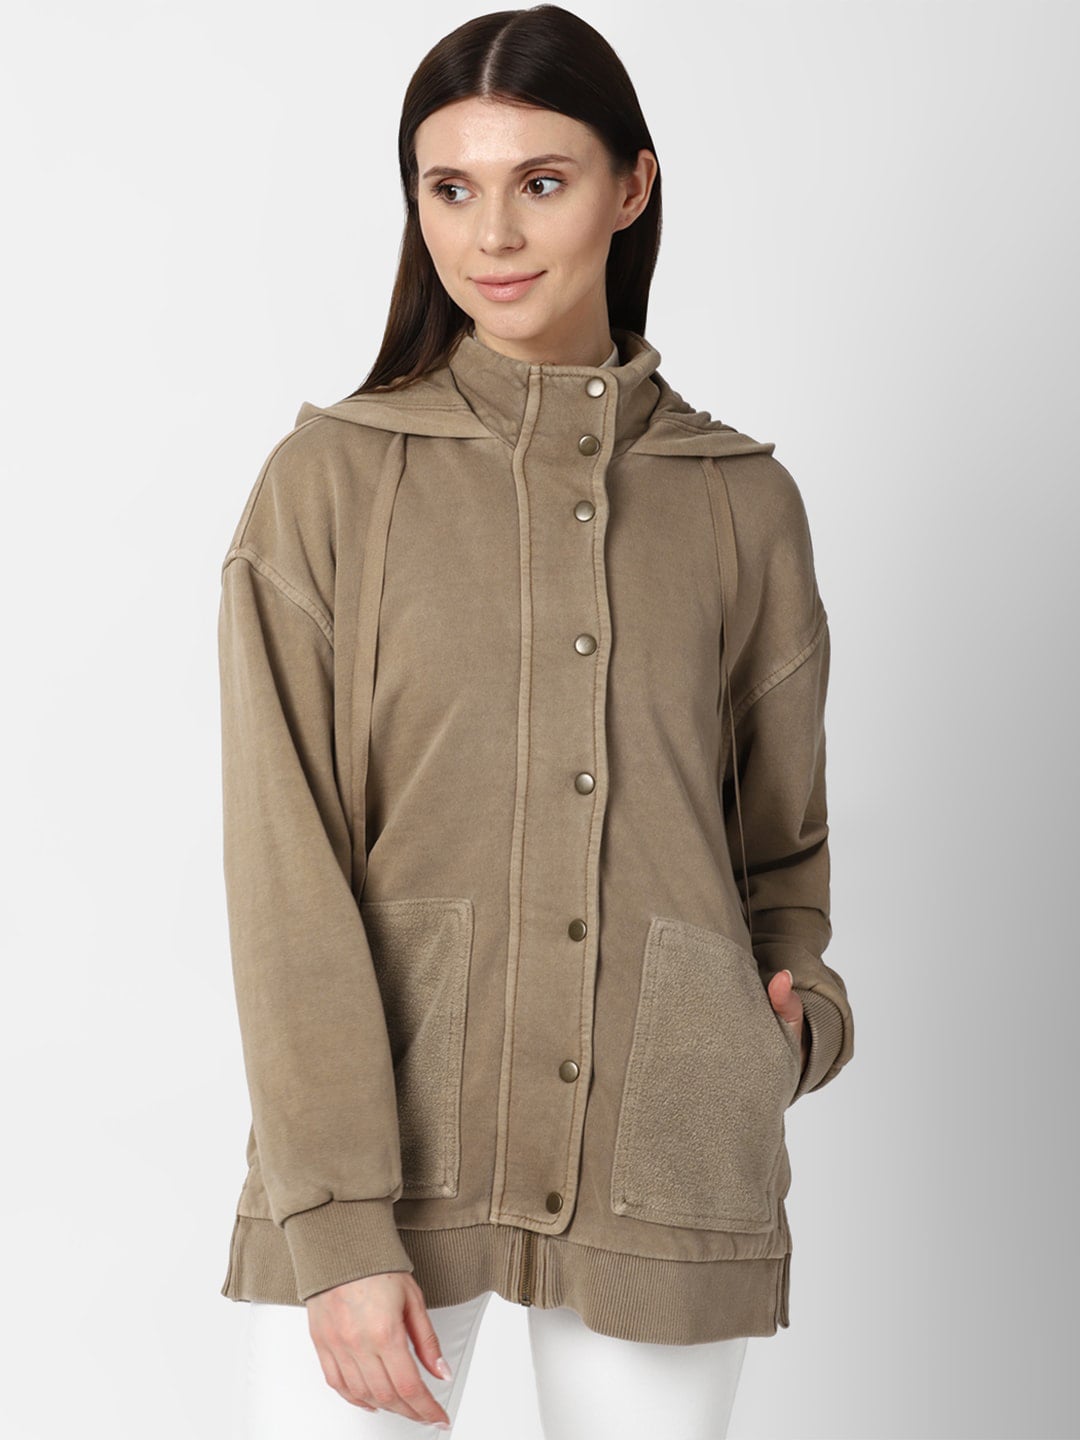 FOREVER 21 Women Brown Tailored Jacket Price in India